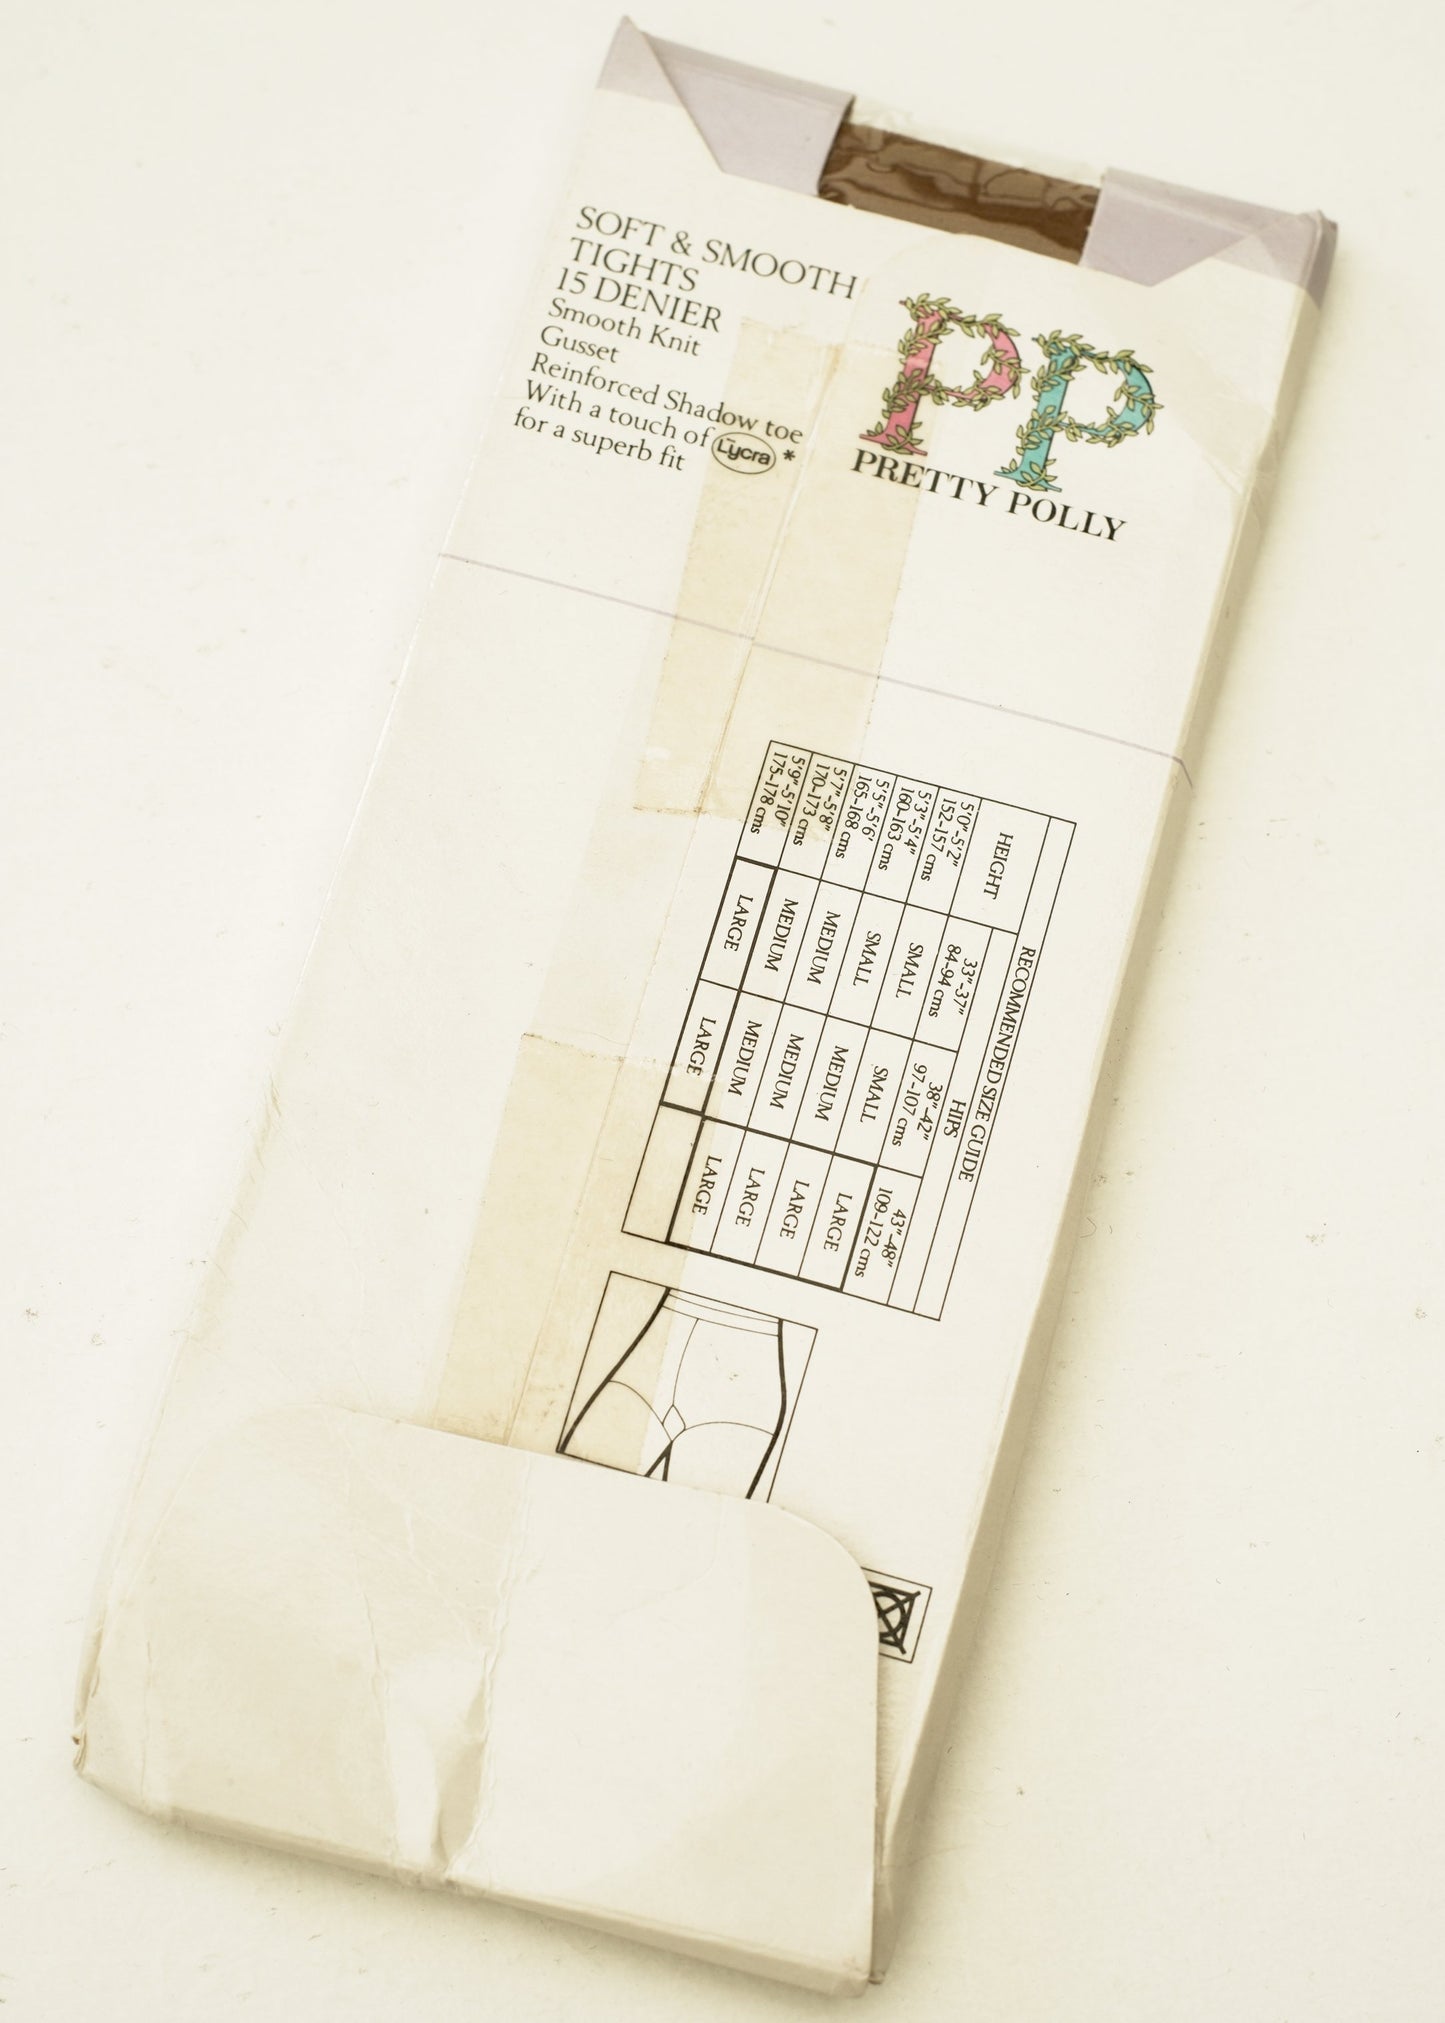 Vintage 80s Pretty Polly Soft and Smooth Tights •  Unopened